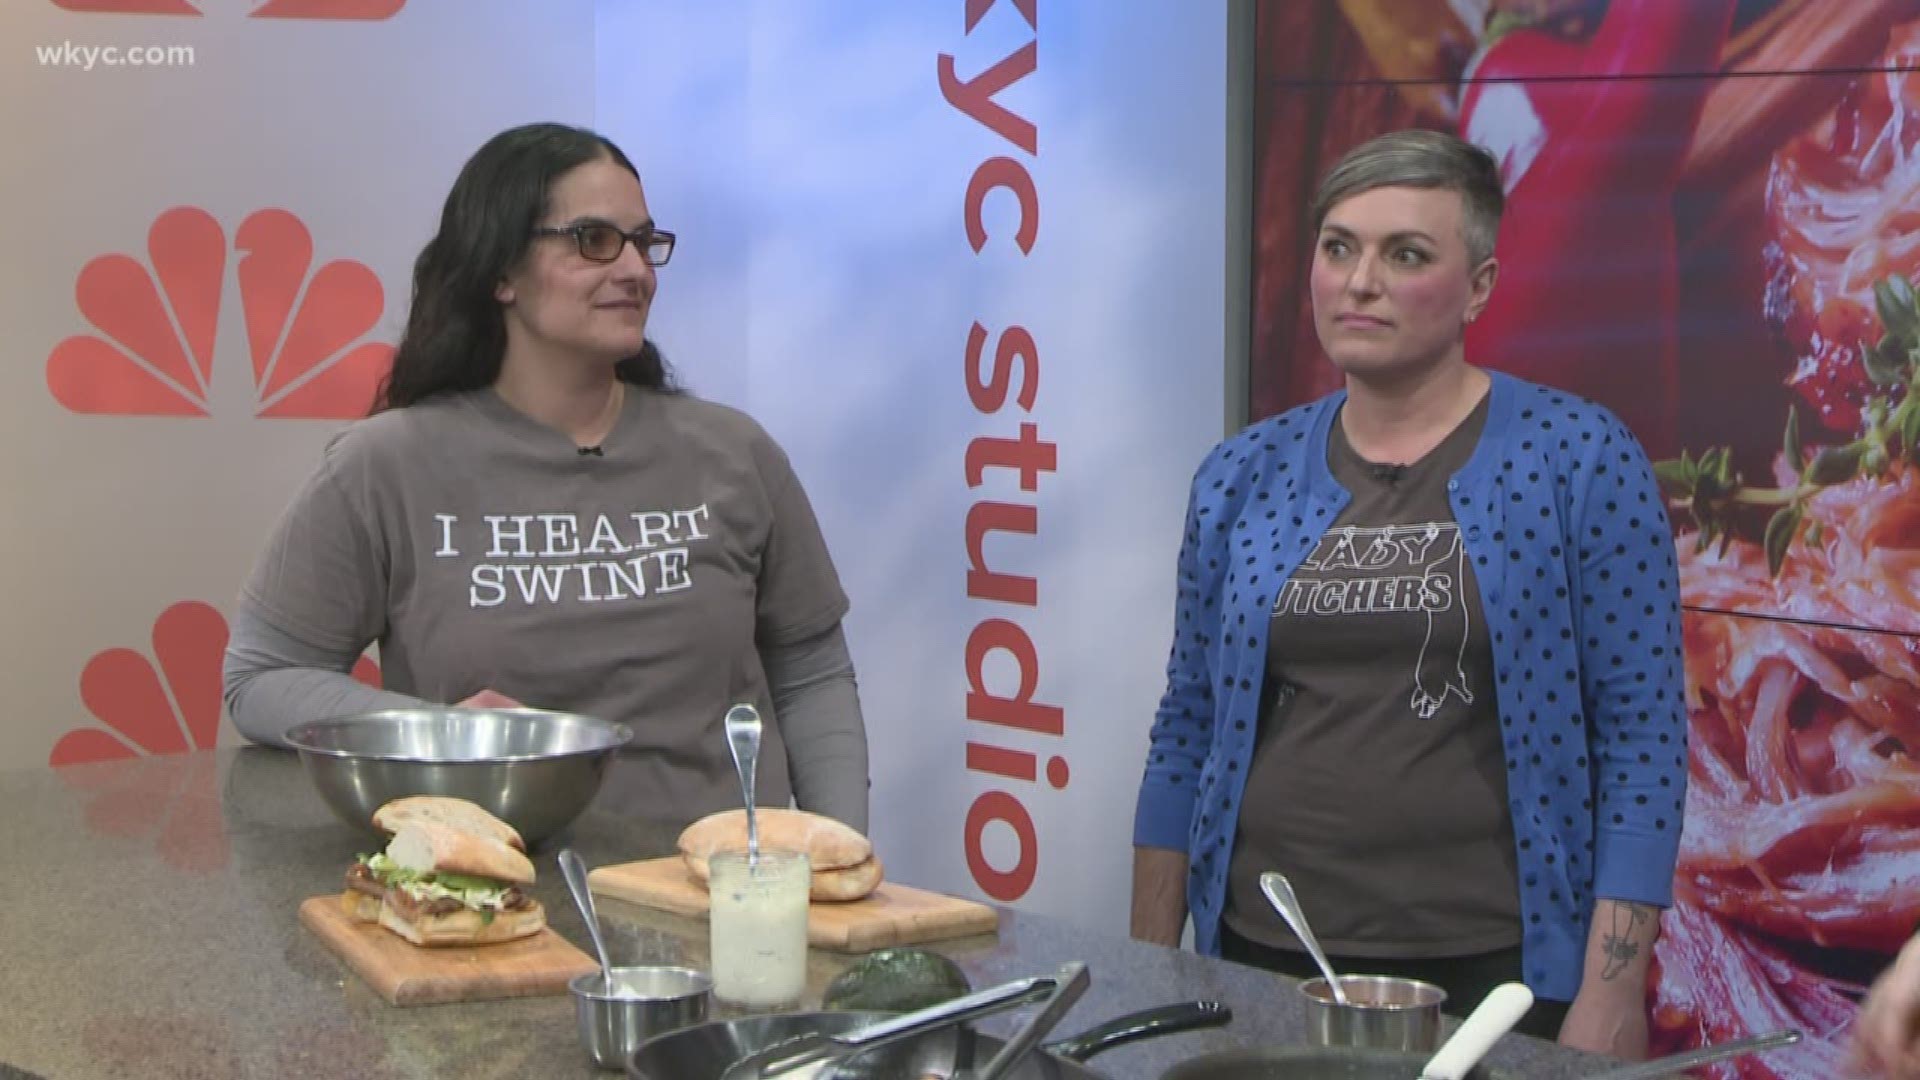 The Slavic Village pair has made national news for their performance on Food Network. On Wednesday, they shared some cooking tips with Jay & Betsy.